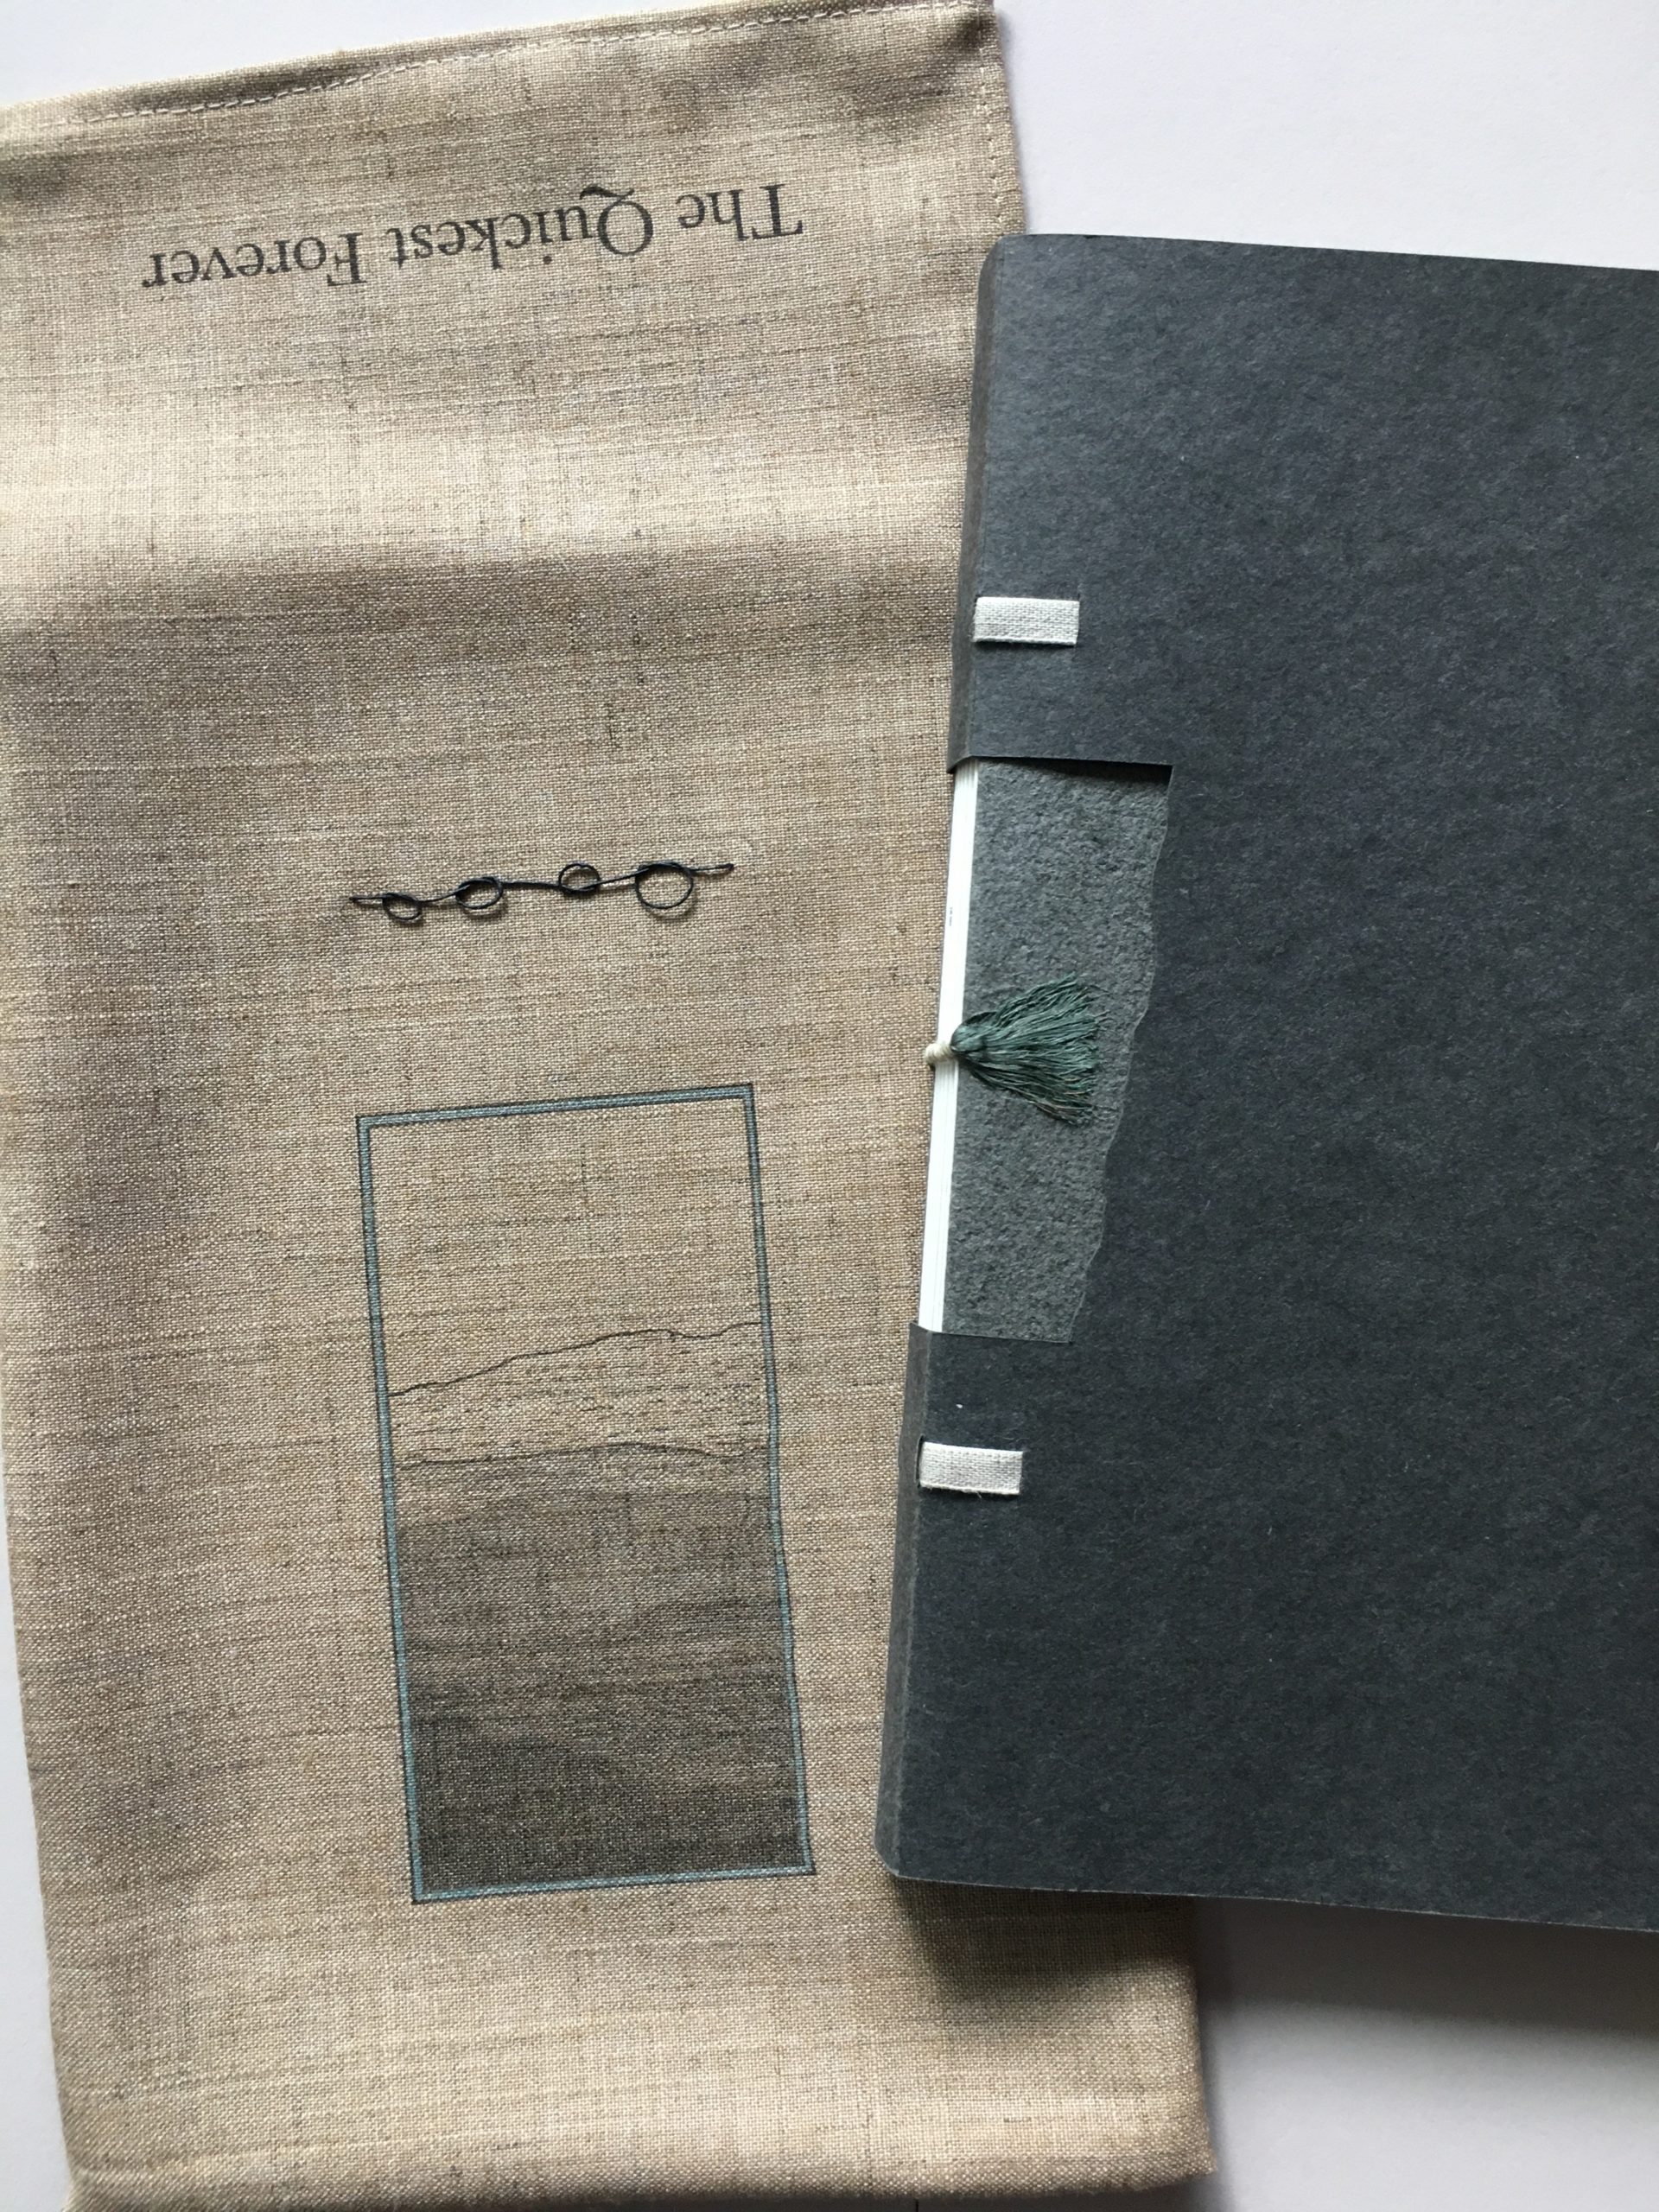 closed gray artist's book sitting on top of a linen pouch